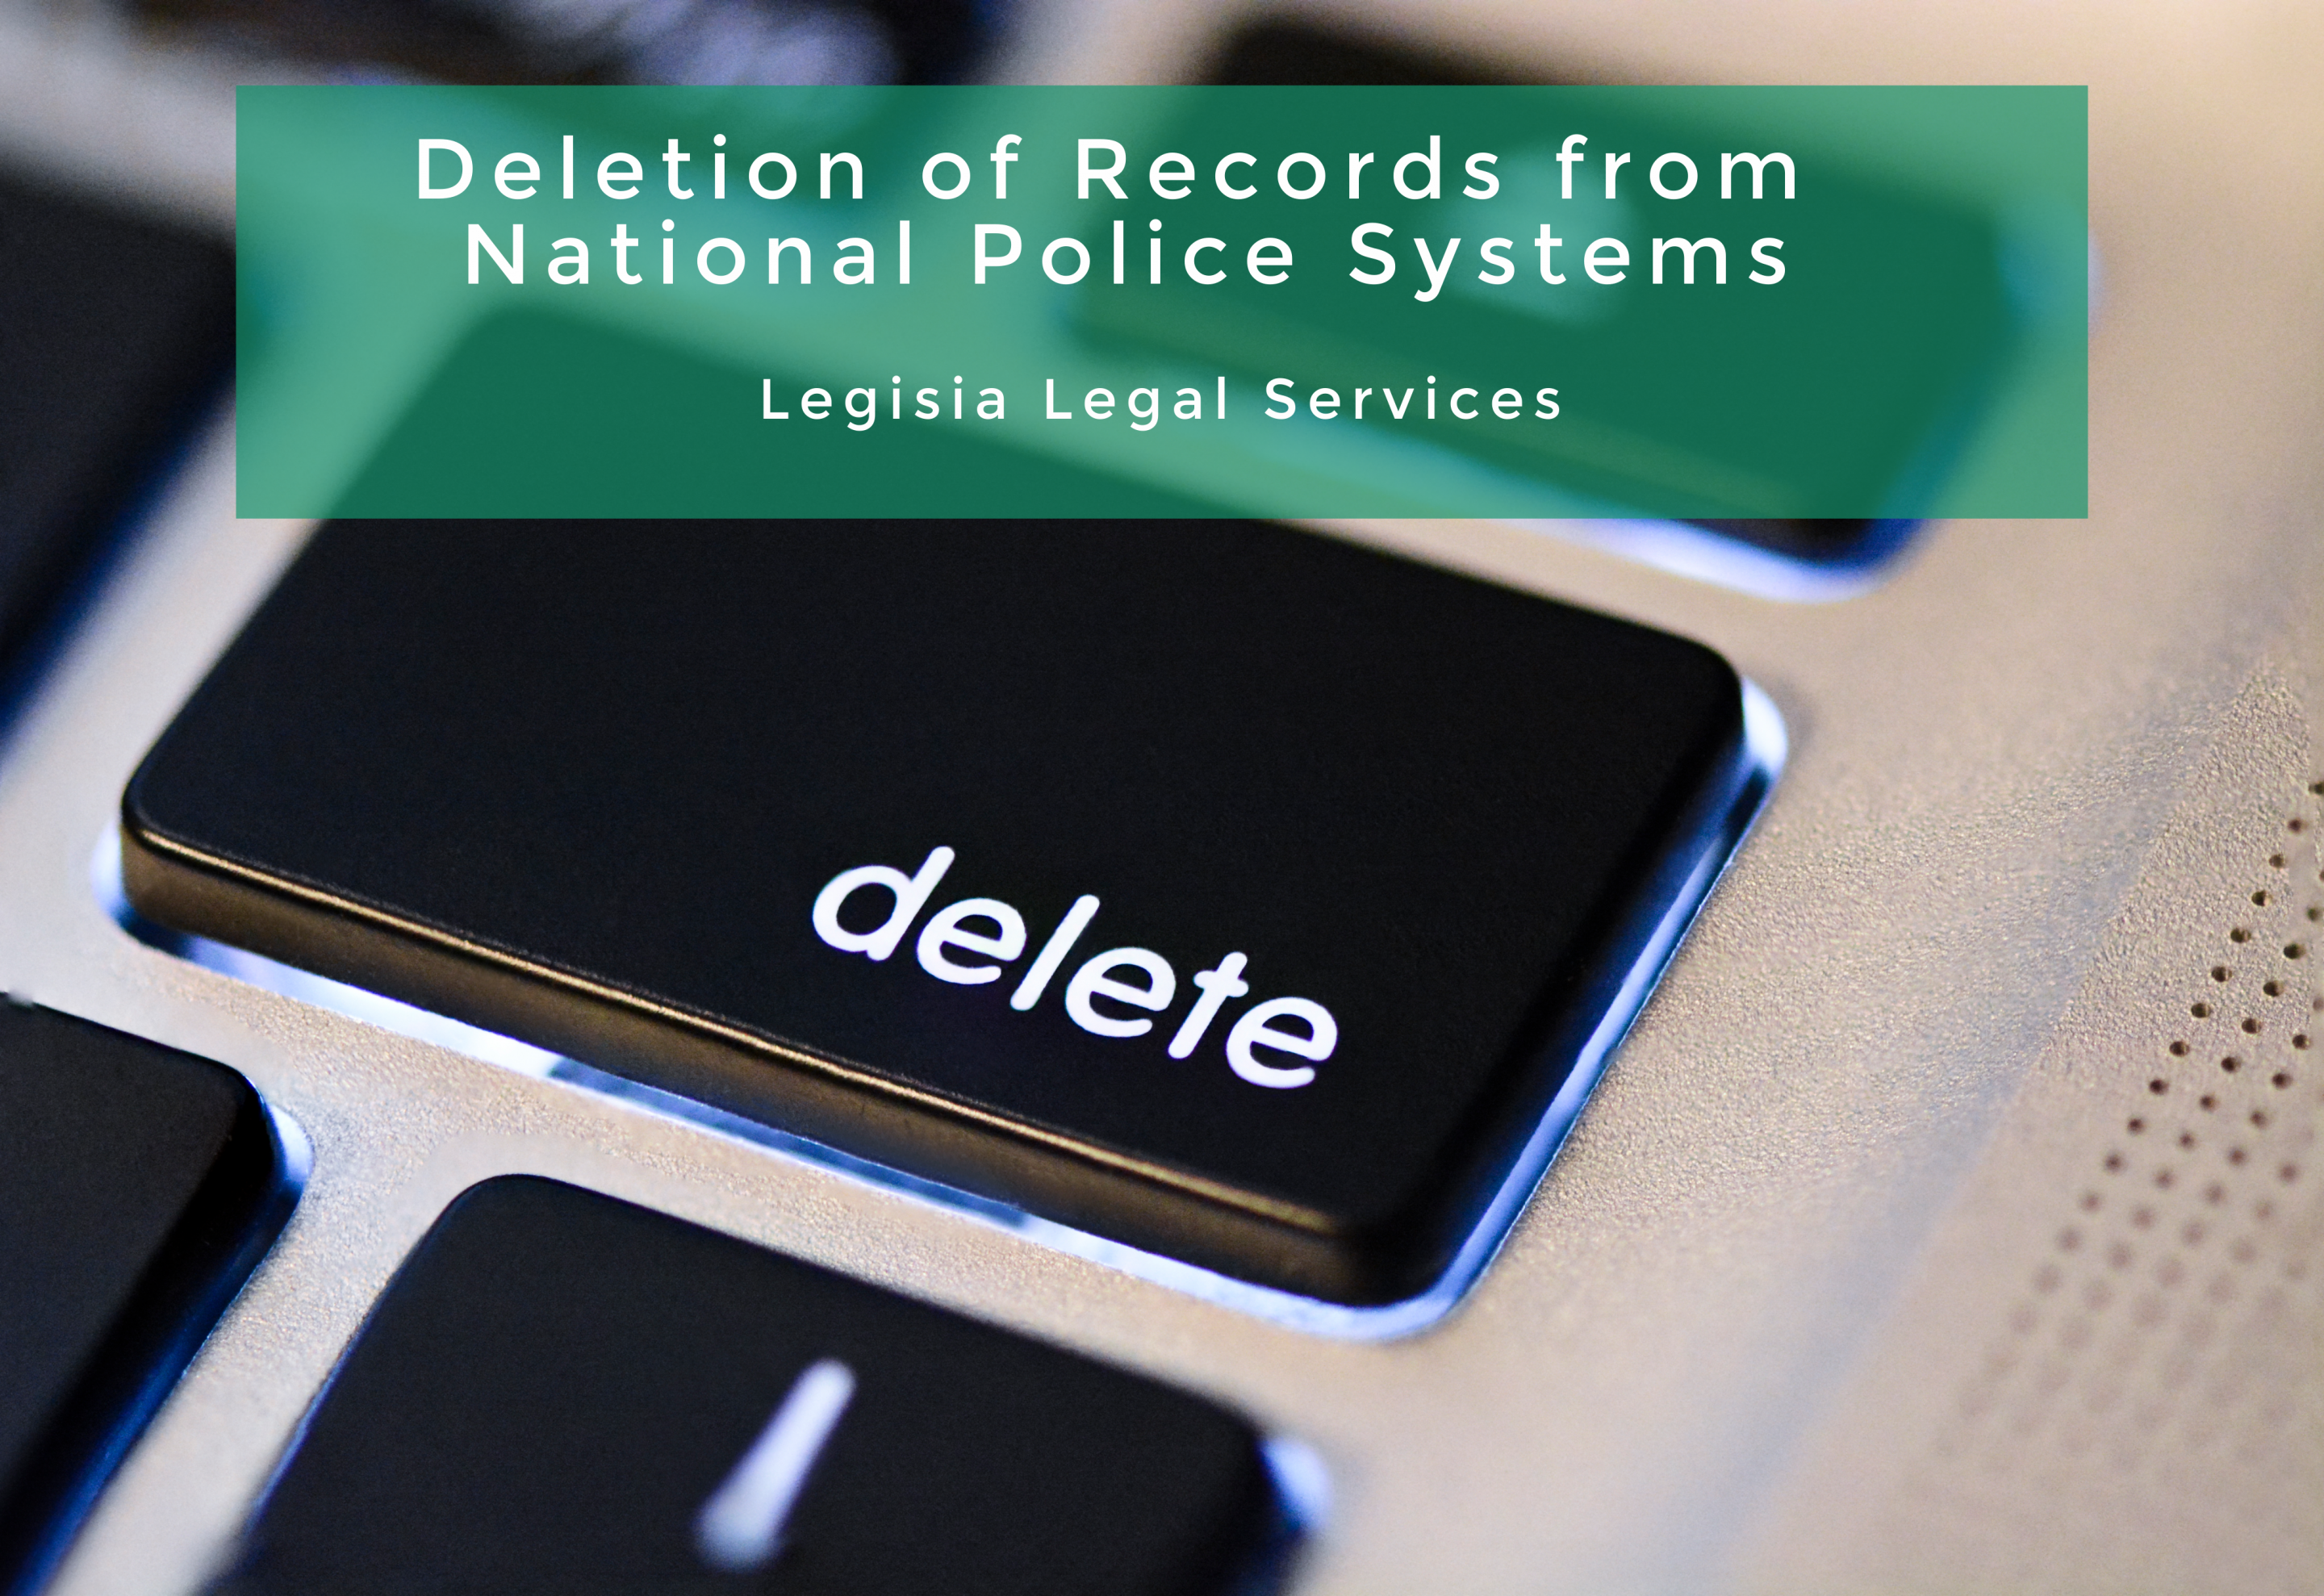 Deletion of records from national police systems